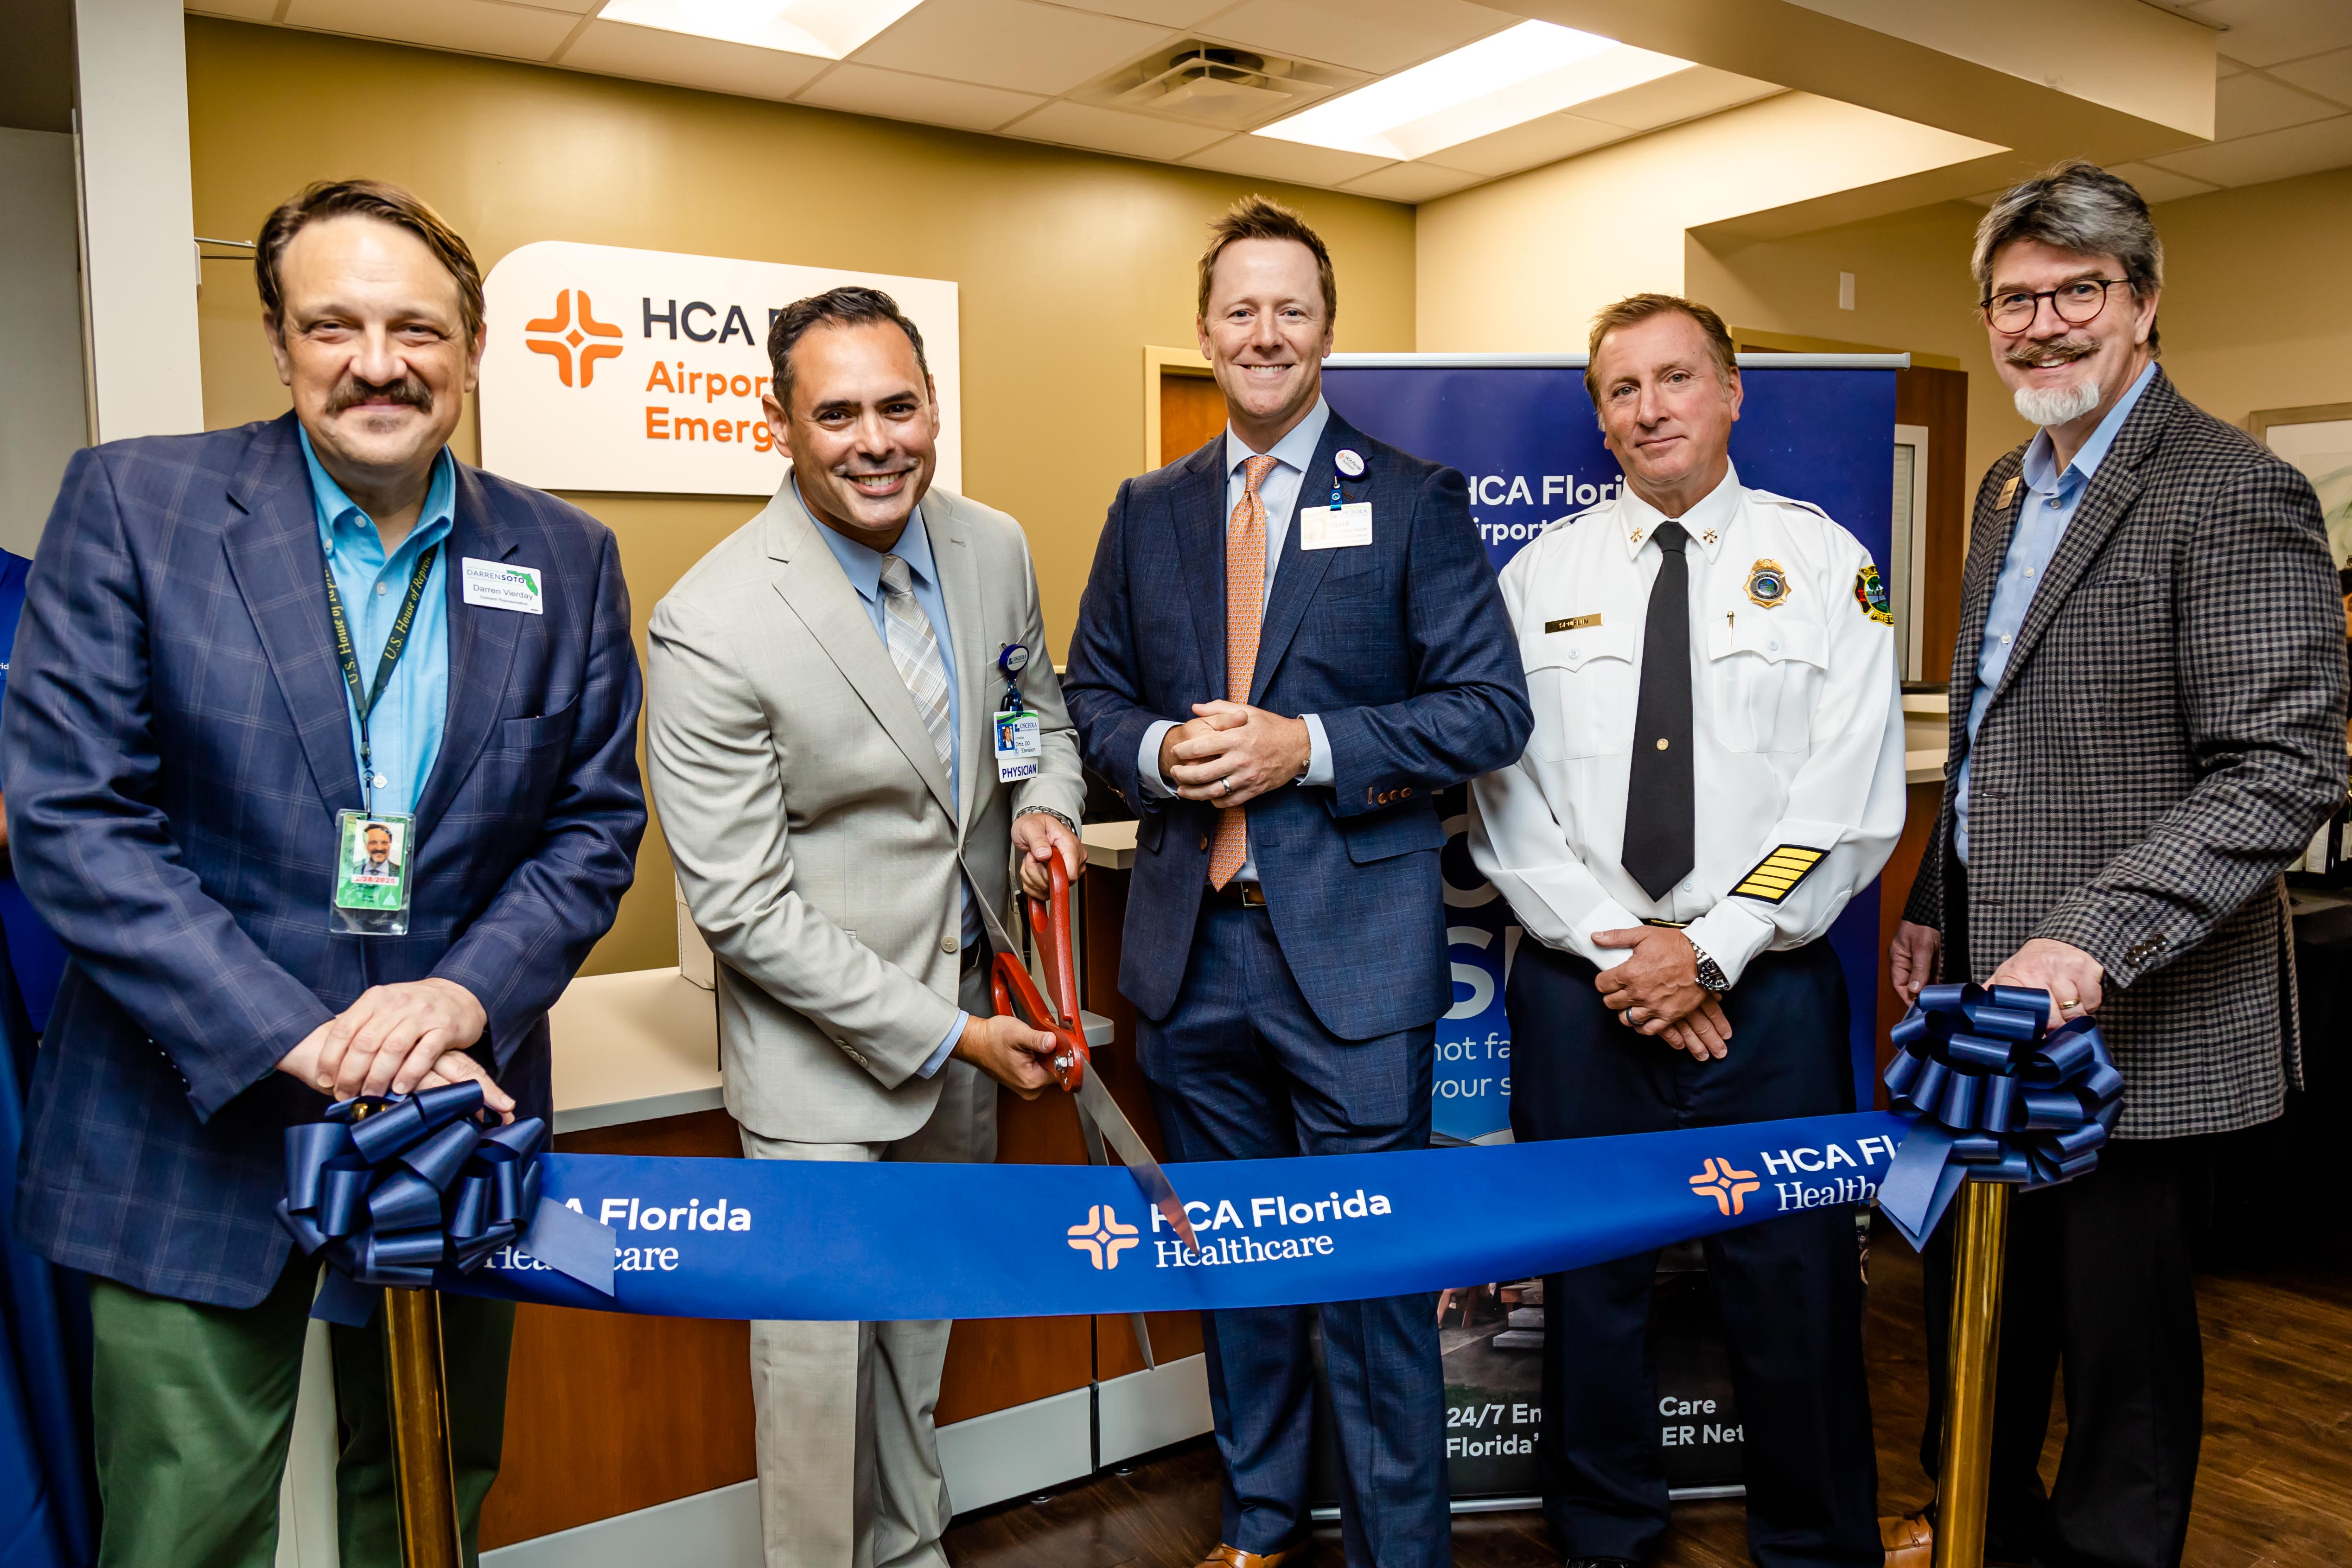 HCA Florida Osceola Hospital, EMS partners, and community leaders cut grand opening ribbon marking the official opening of HCA Florida Airport North Emergency.